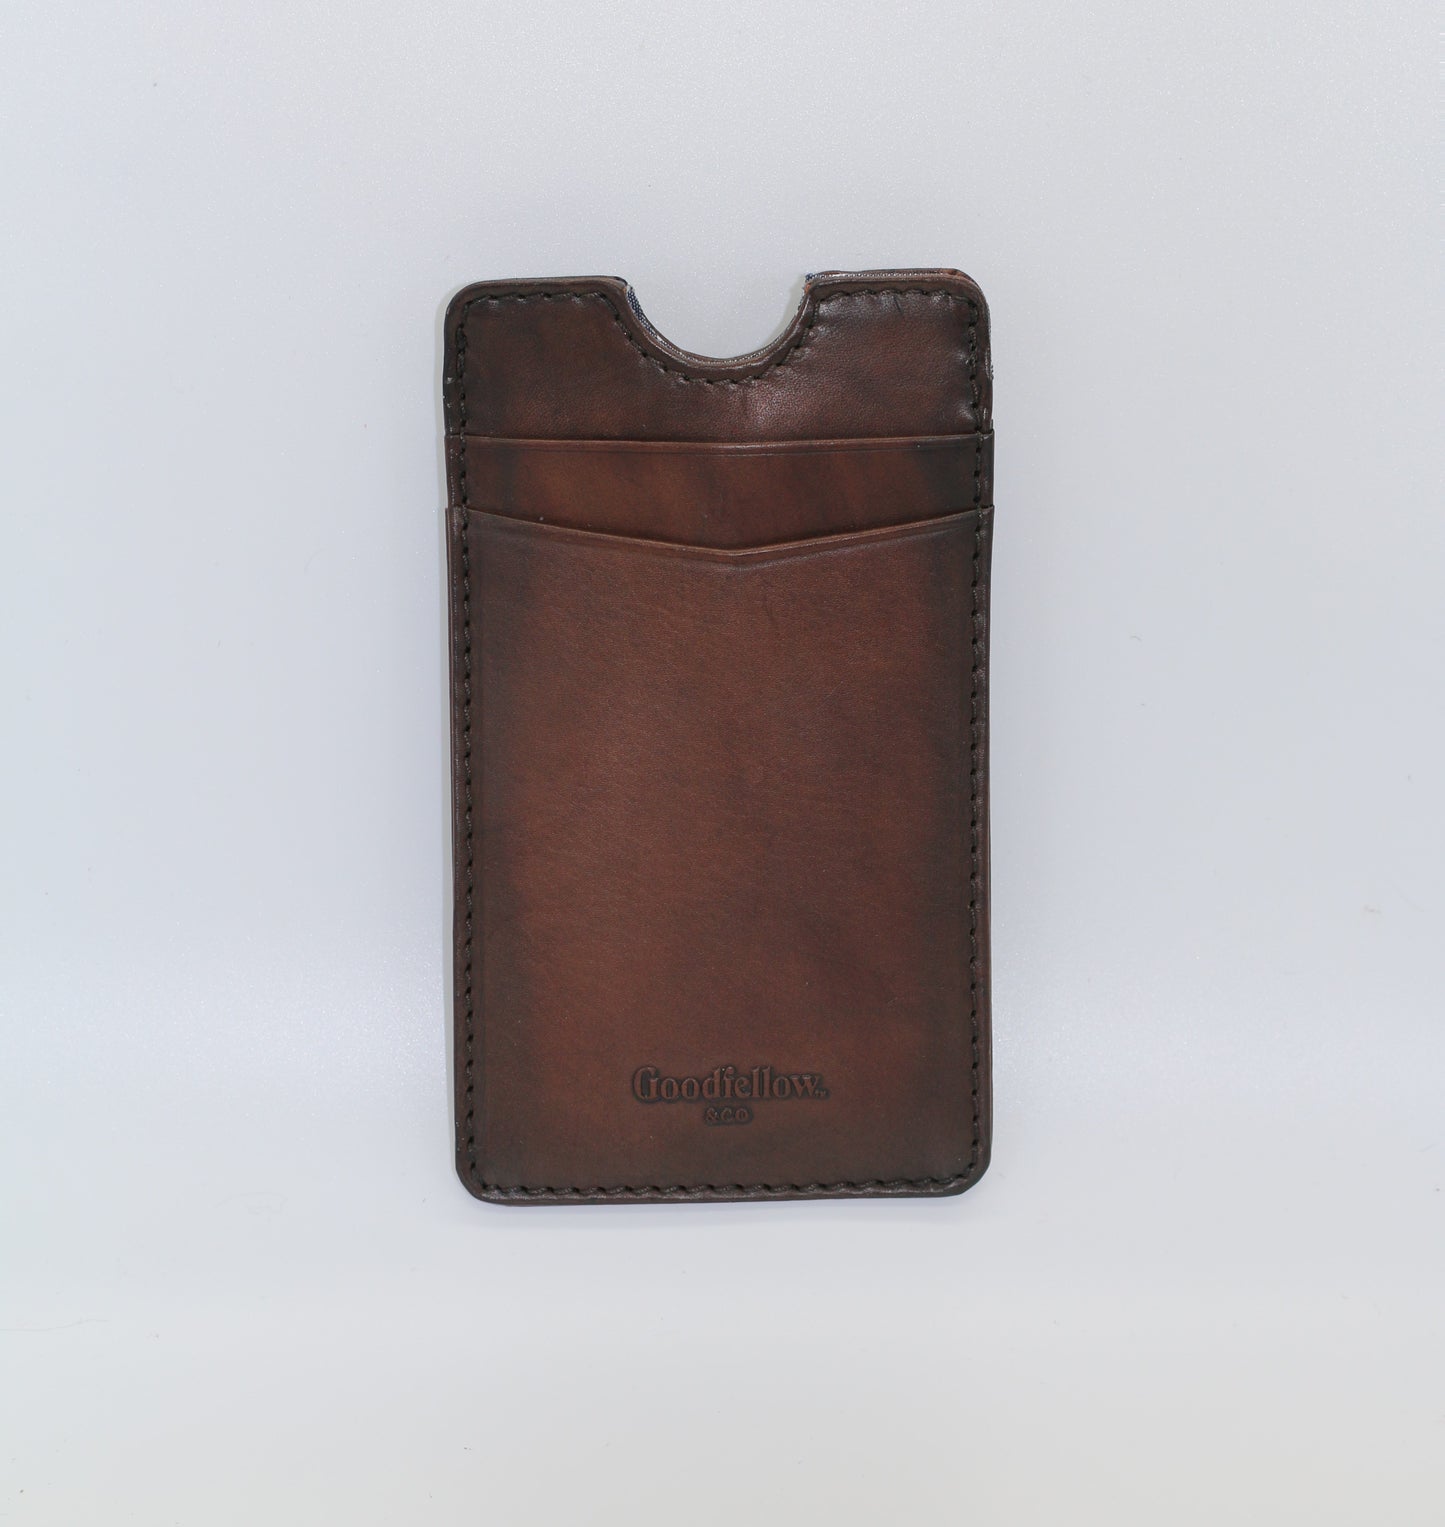 New Goodfellow & Co Phone Sleeve Wallet Leather Card Case